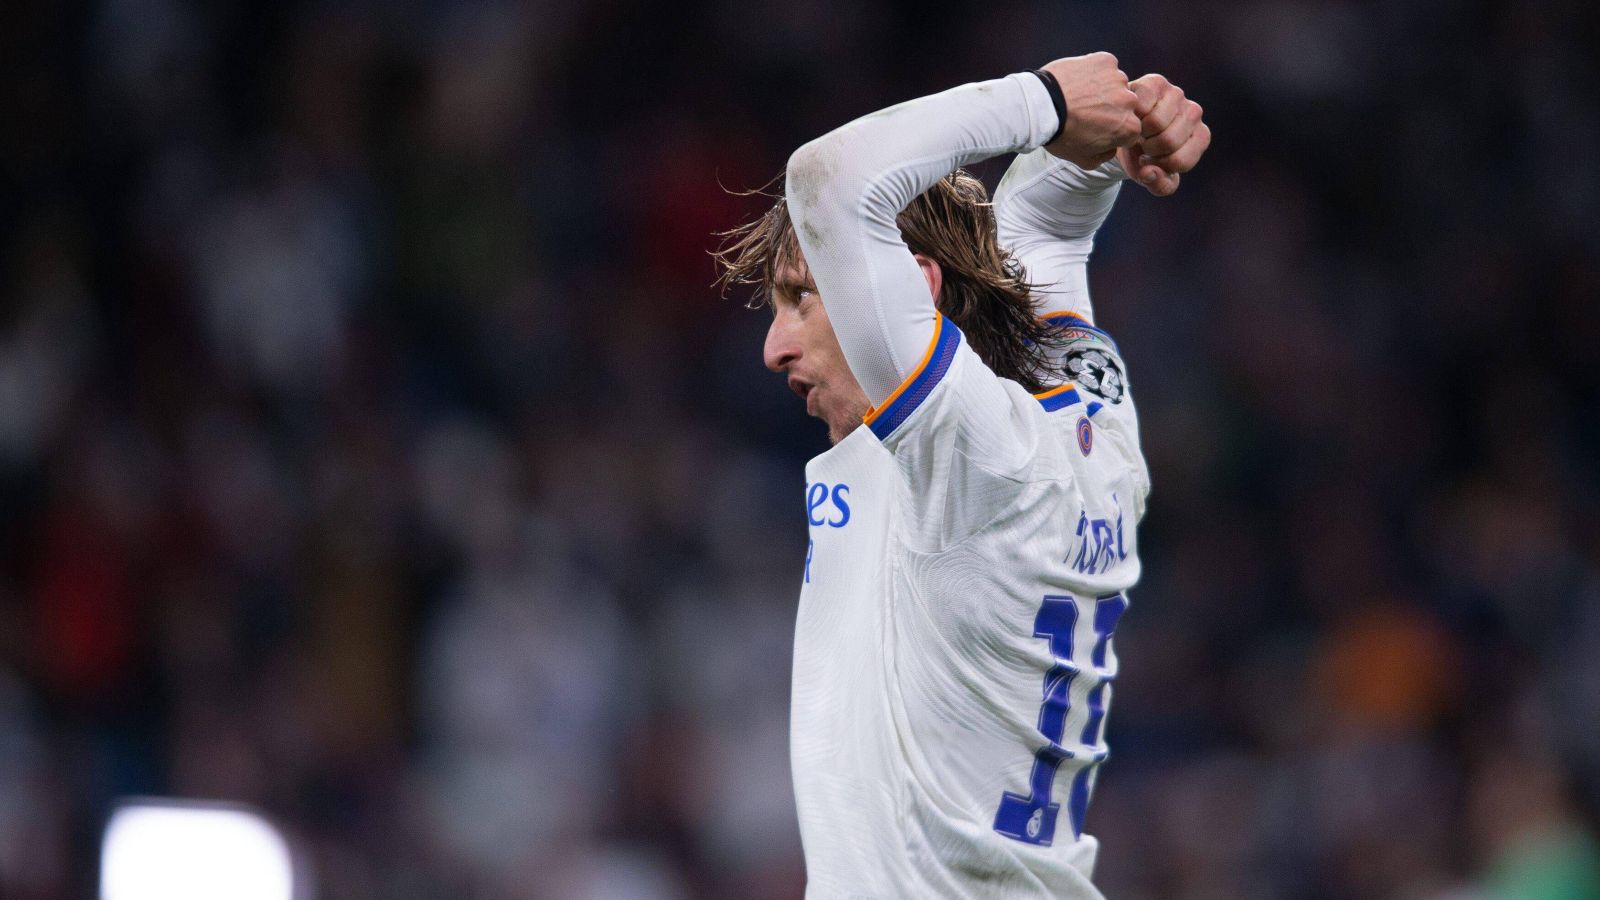 We don't want to face football without the wonderful Luka Modric